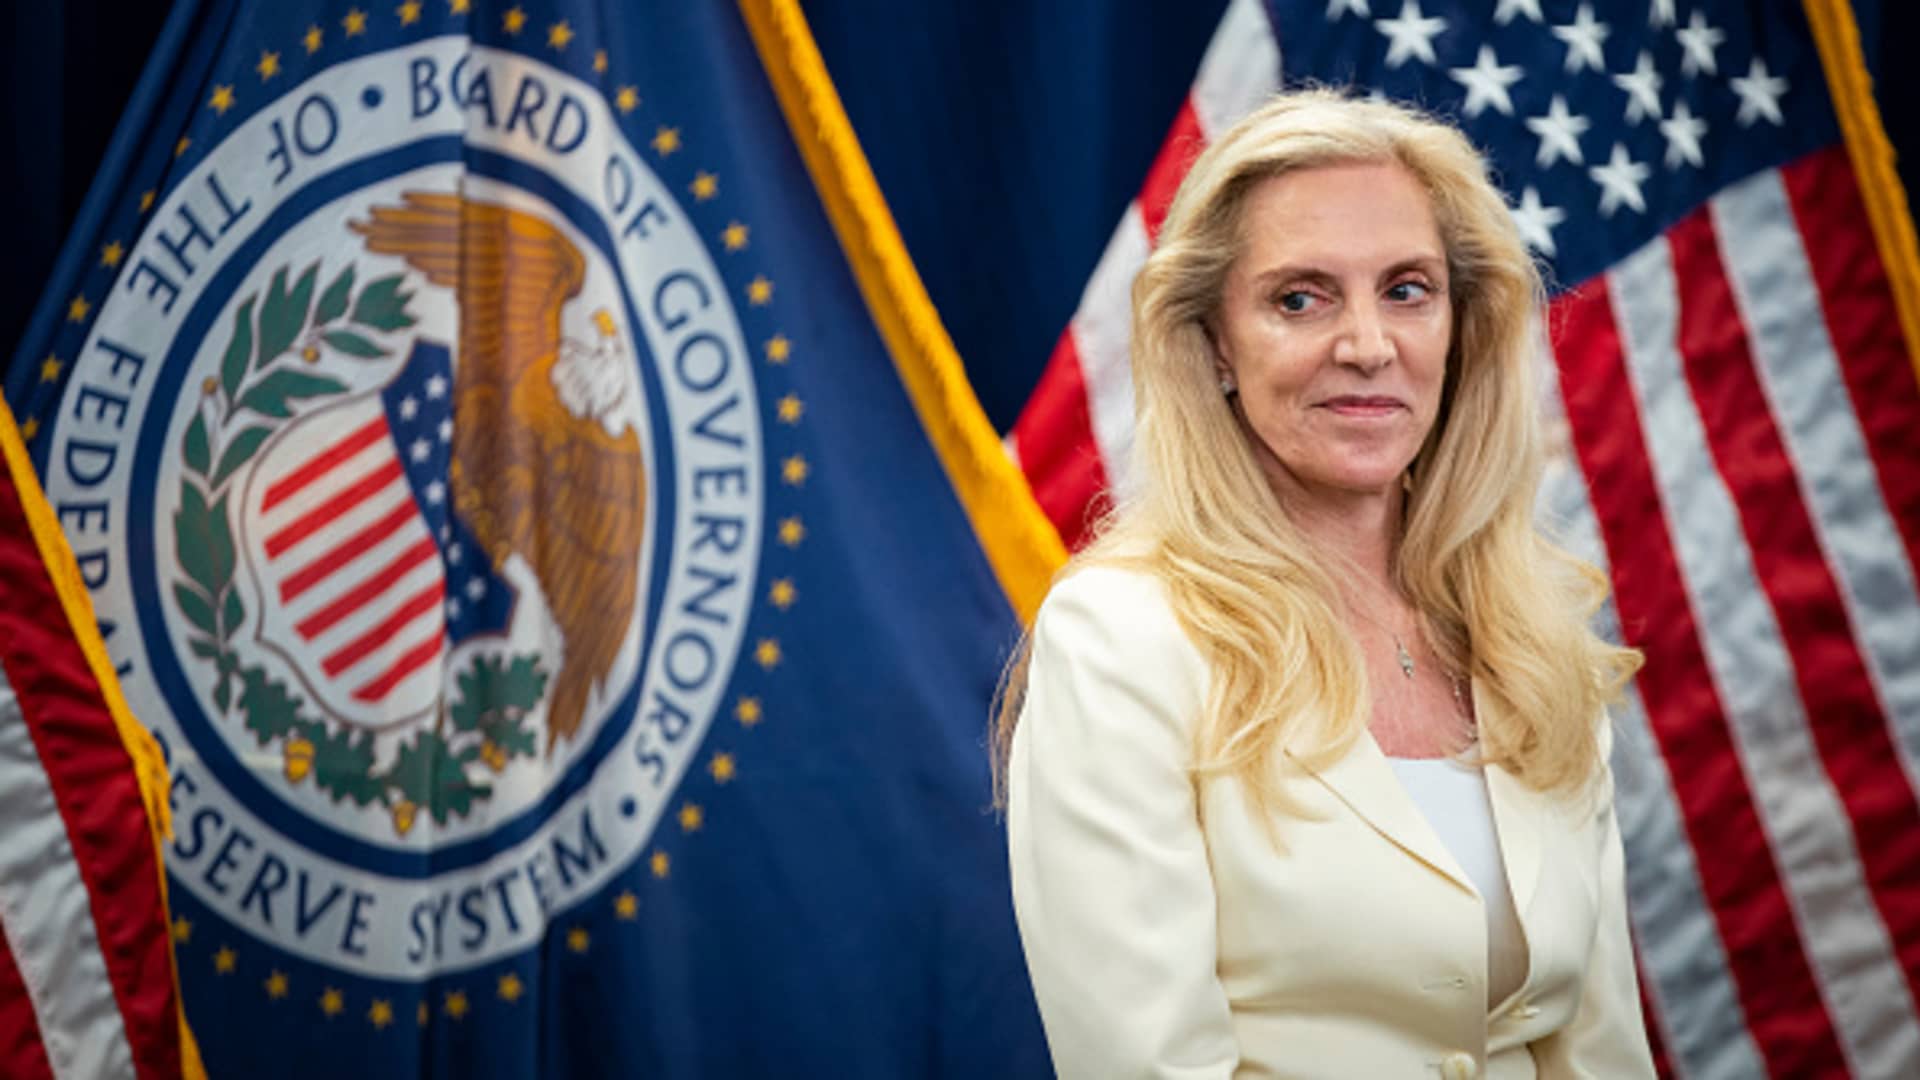 White House likely to tap Brainard, Bernstein as top economic advisors, sources say